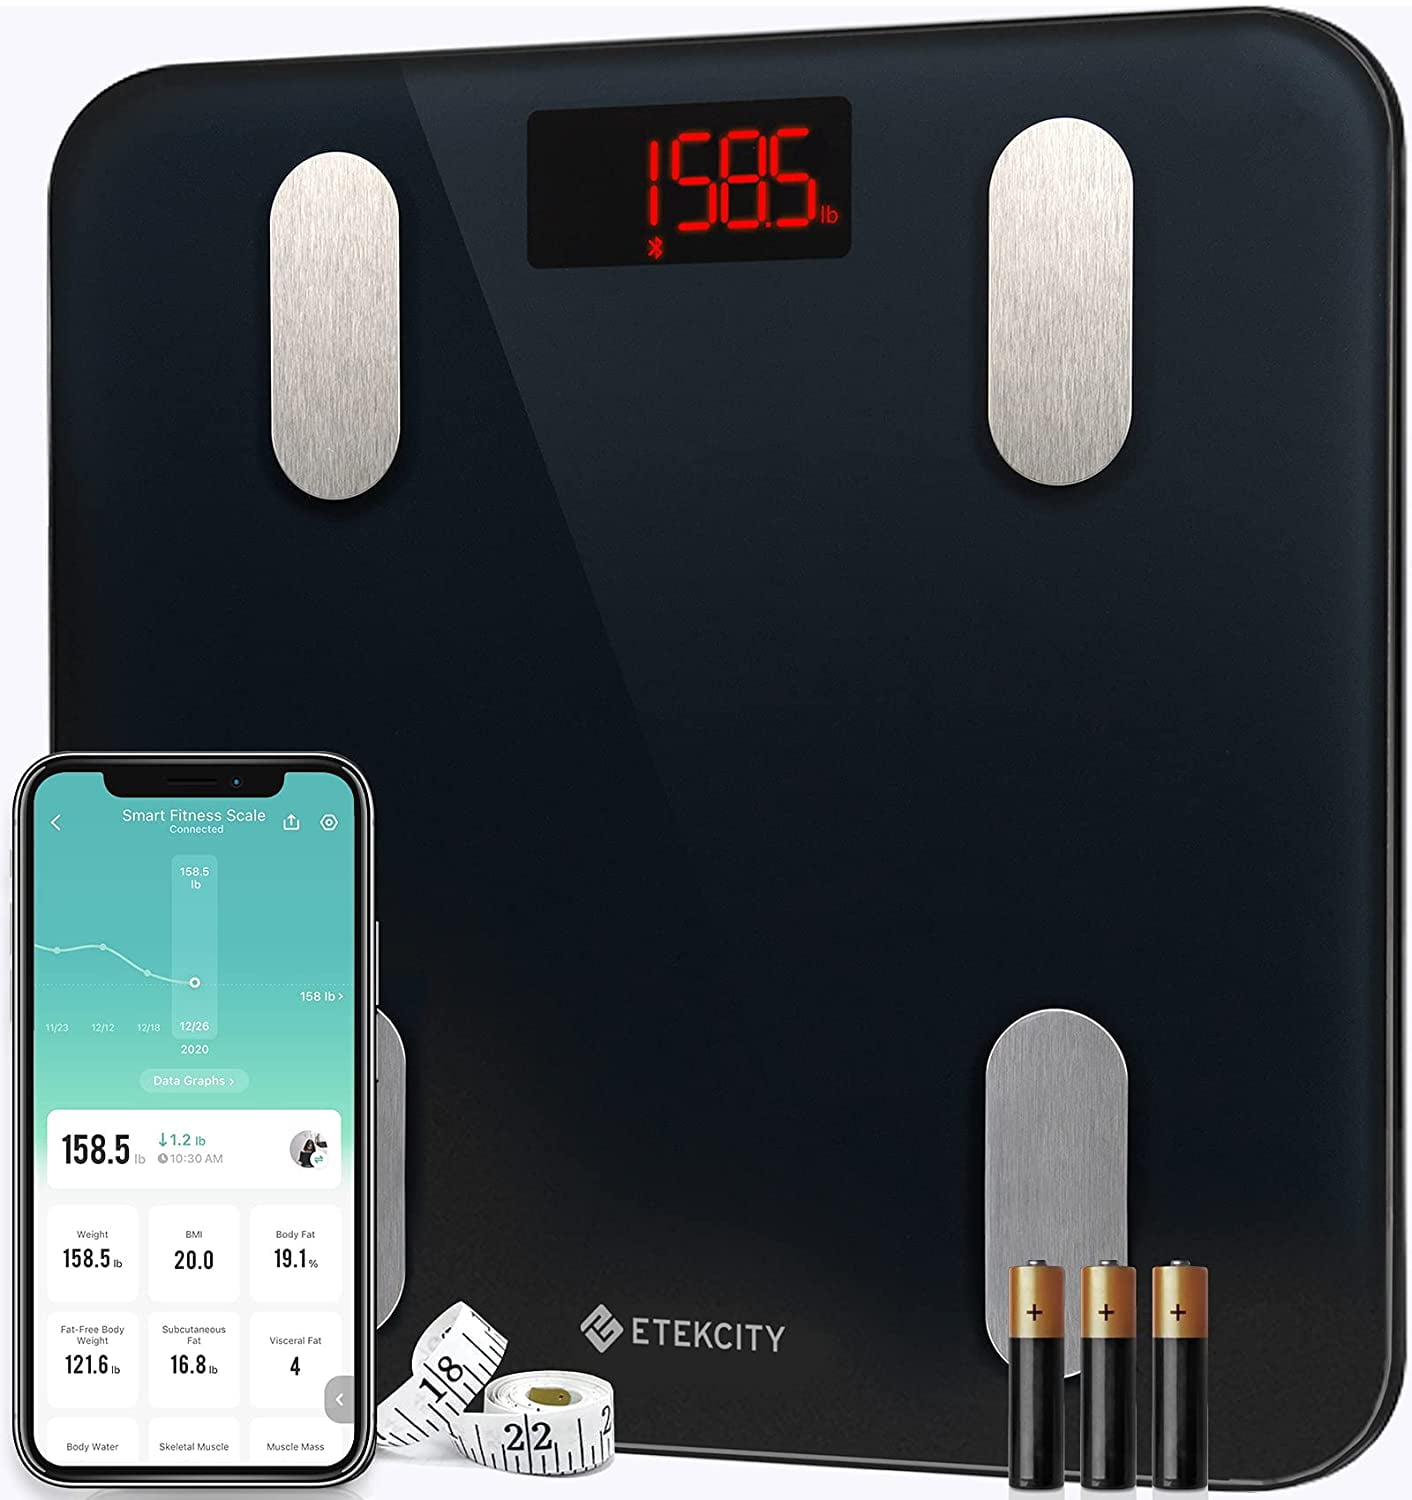 Home Use Digital Body Weight Scale,Measures Weight up to 400 lbs,USB Electronic Digital Weight Scale Body Fat Household Weighing Balance Weight Scale,battery Not Included Bathroom Scale 